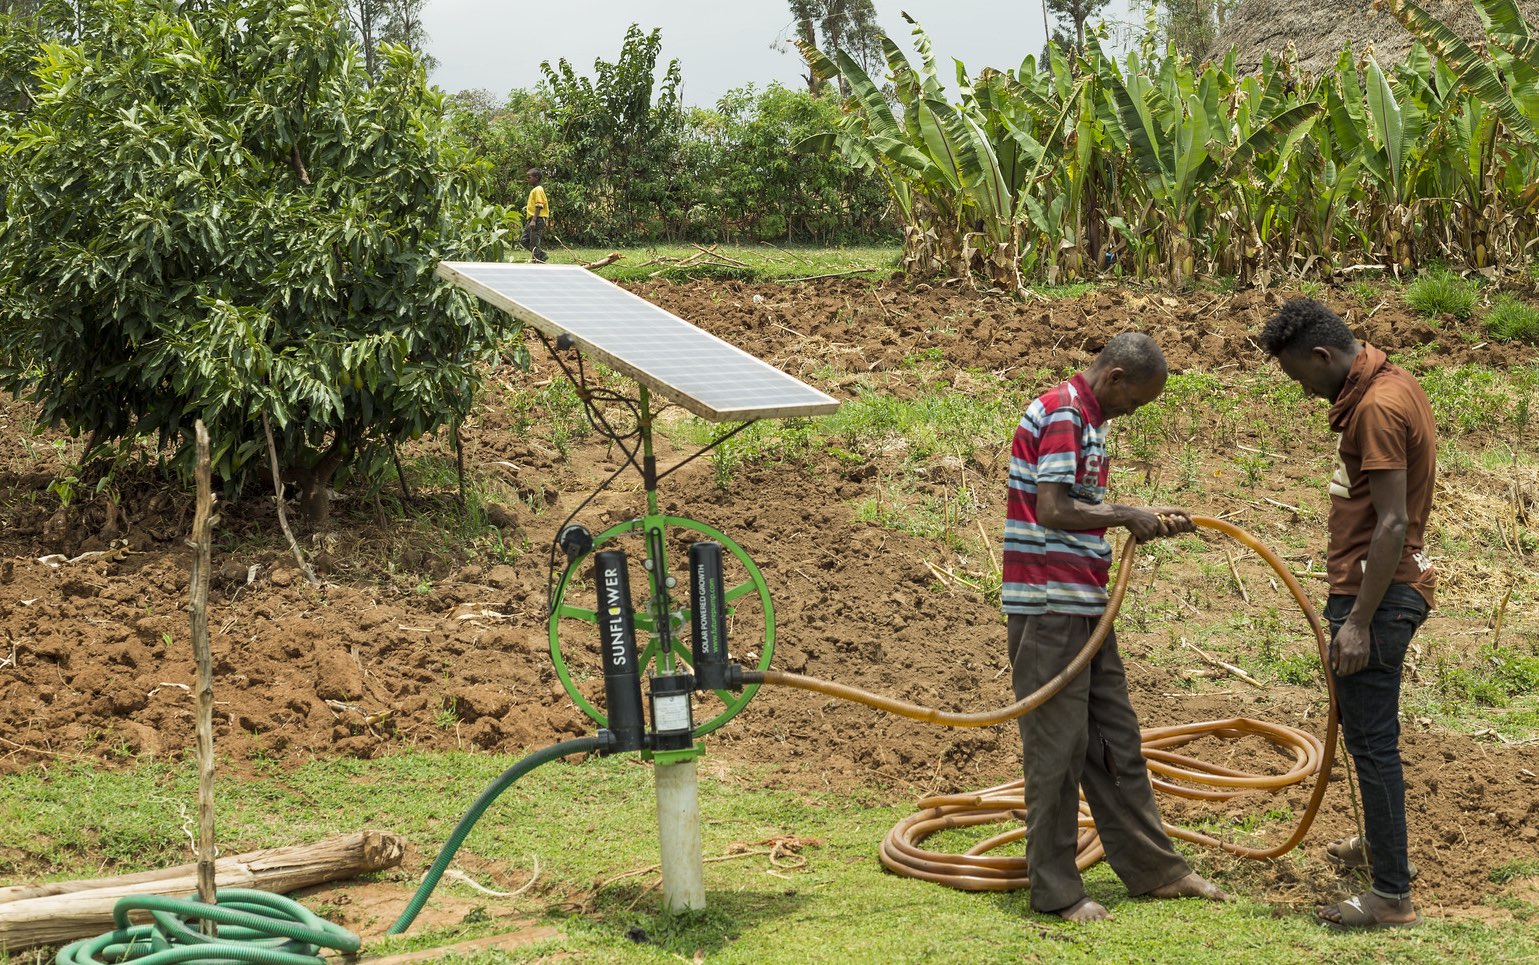 How can we address recurring global food and fuel crises? The role of solar powered irrigation